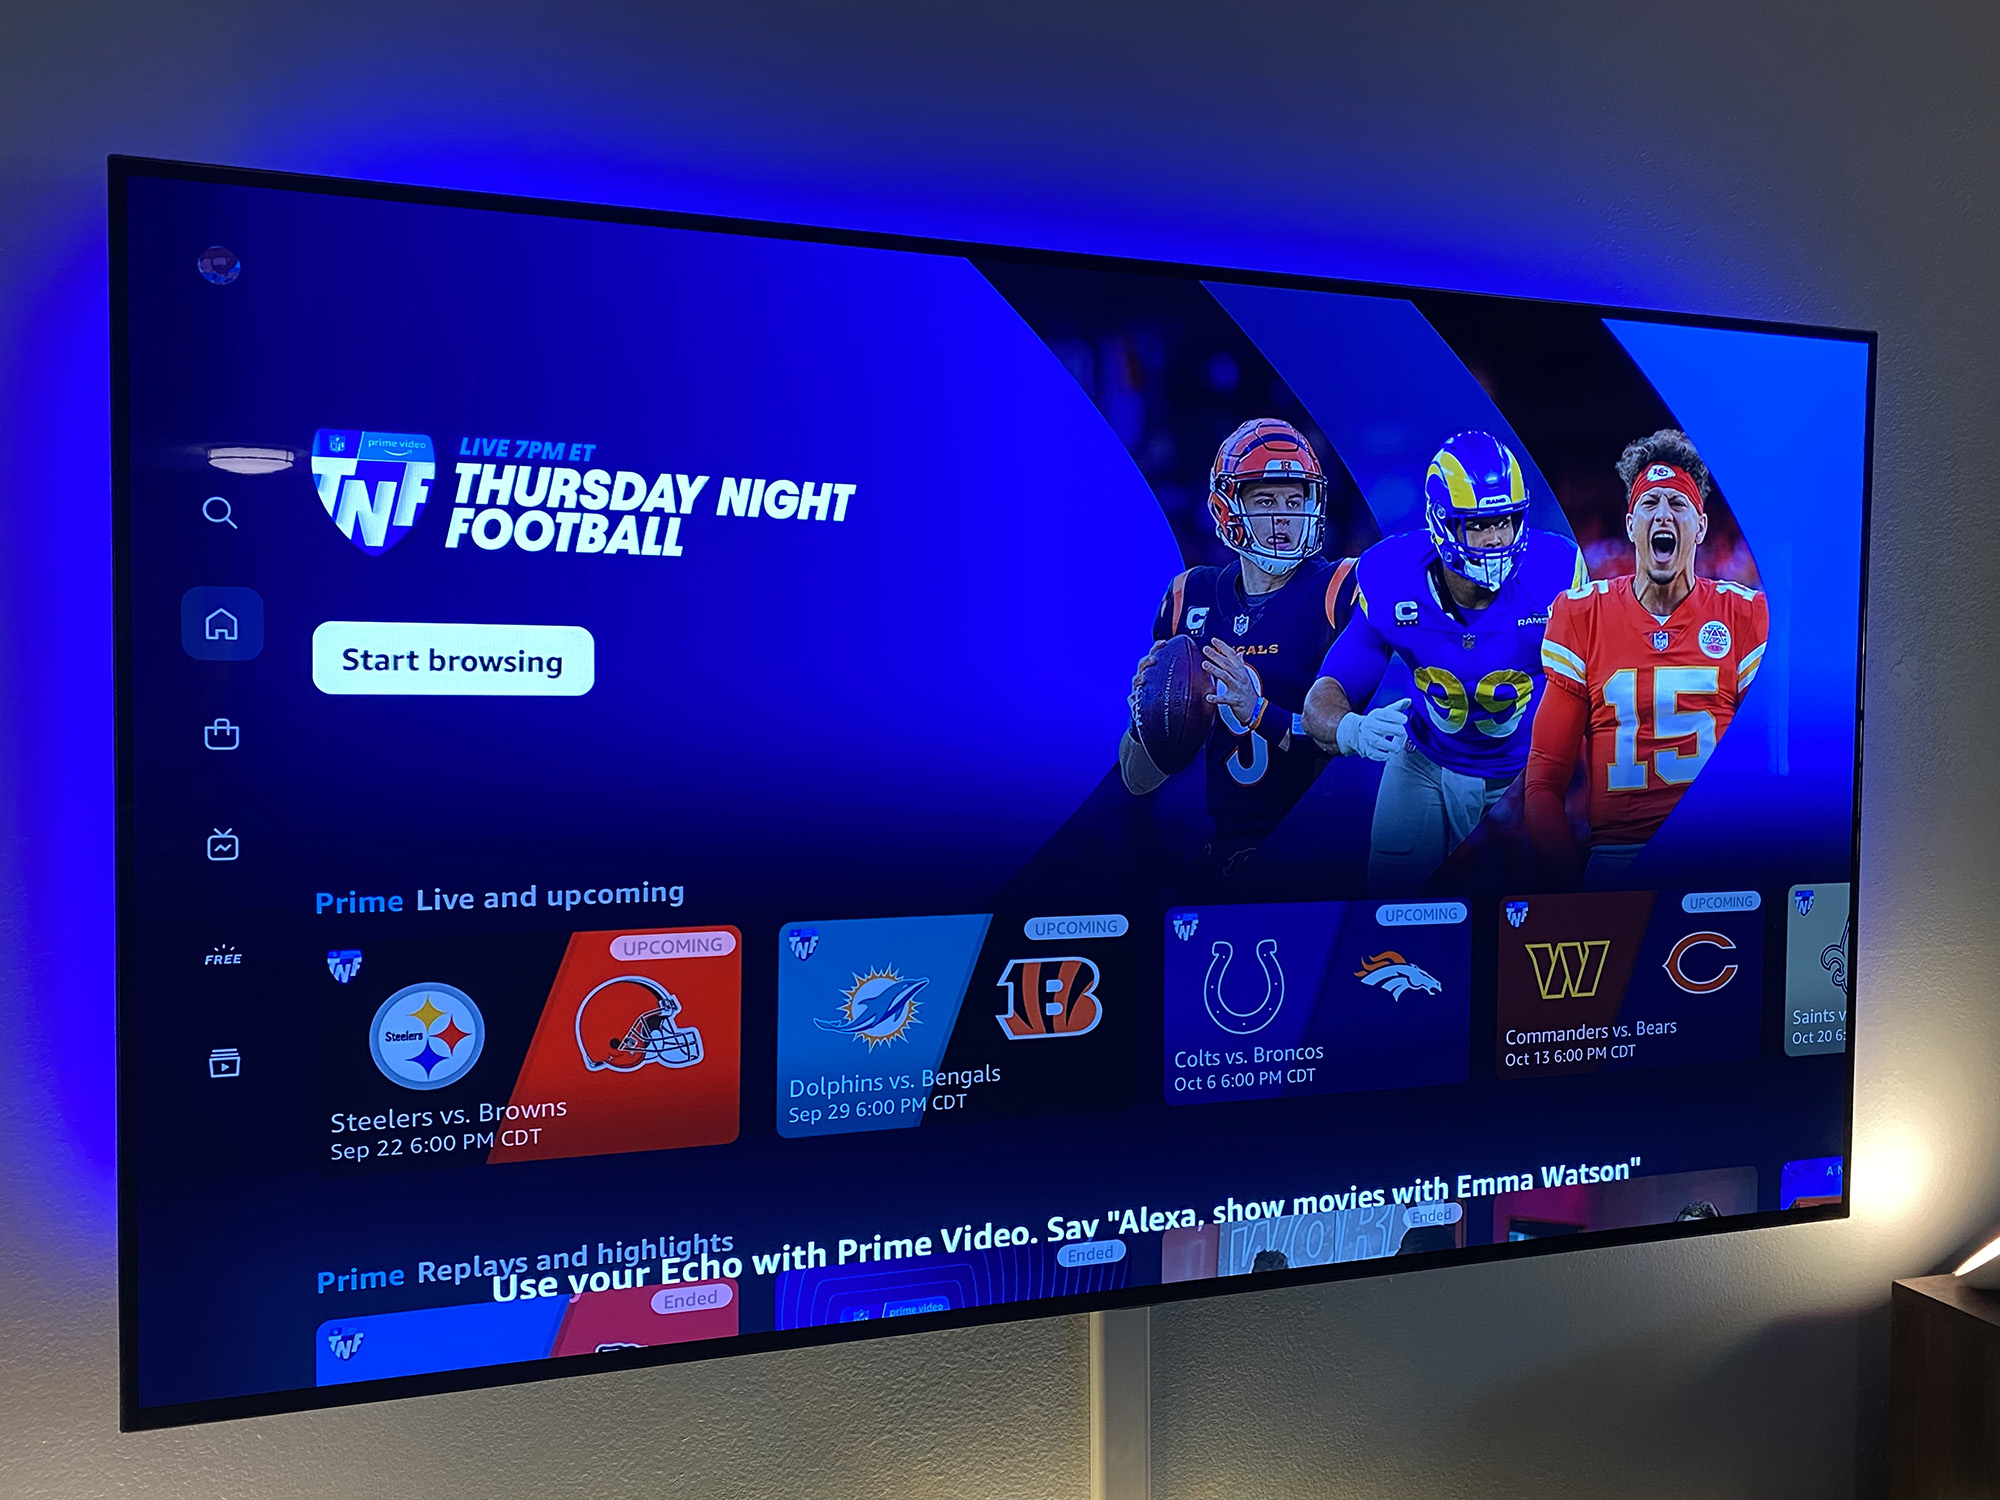 Prime Video's first solo Thursday Night Football NFL game went